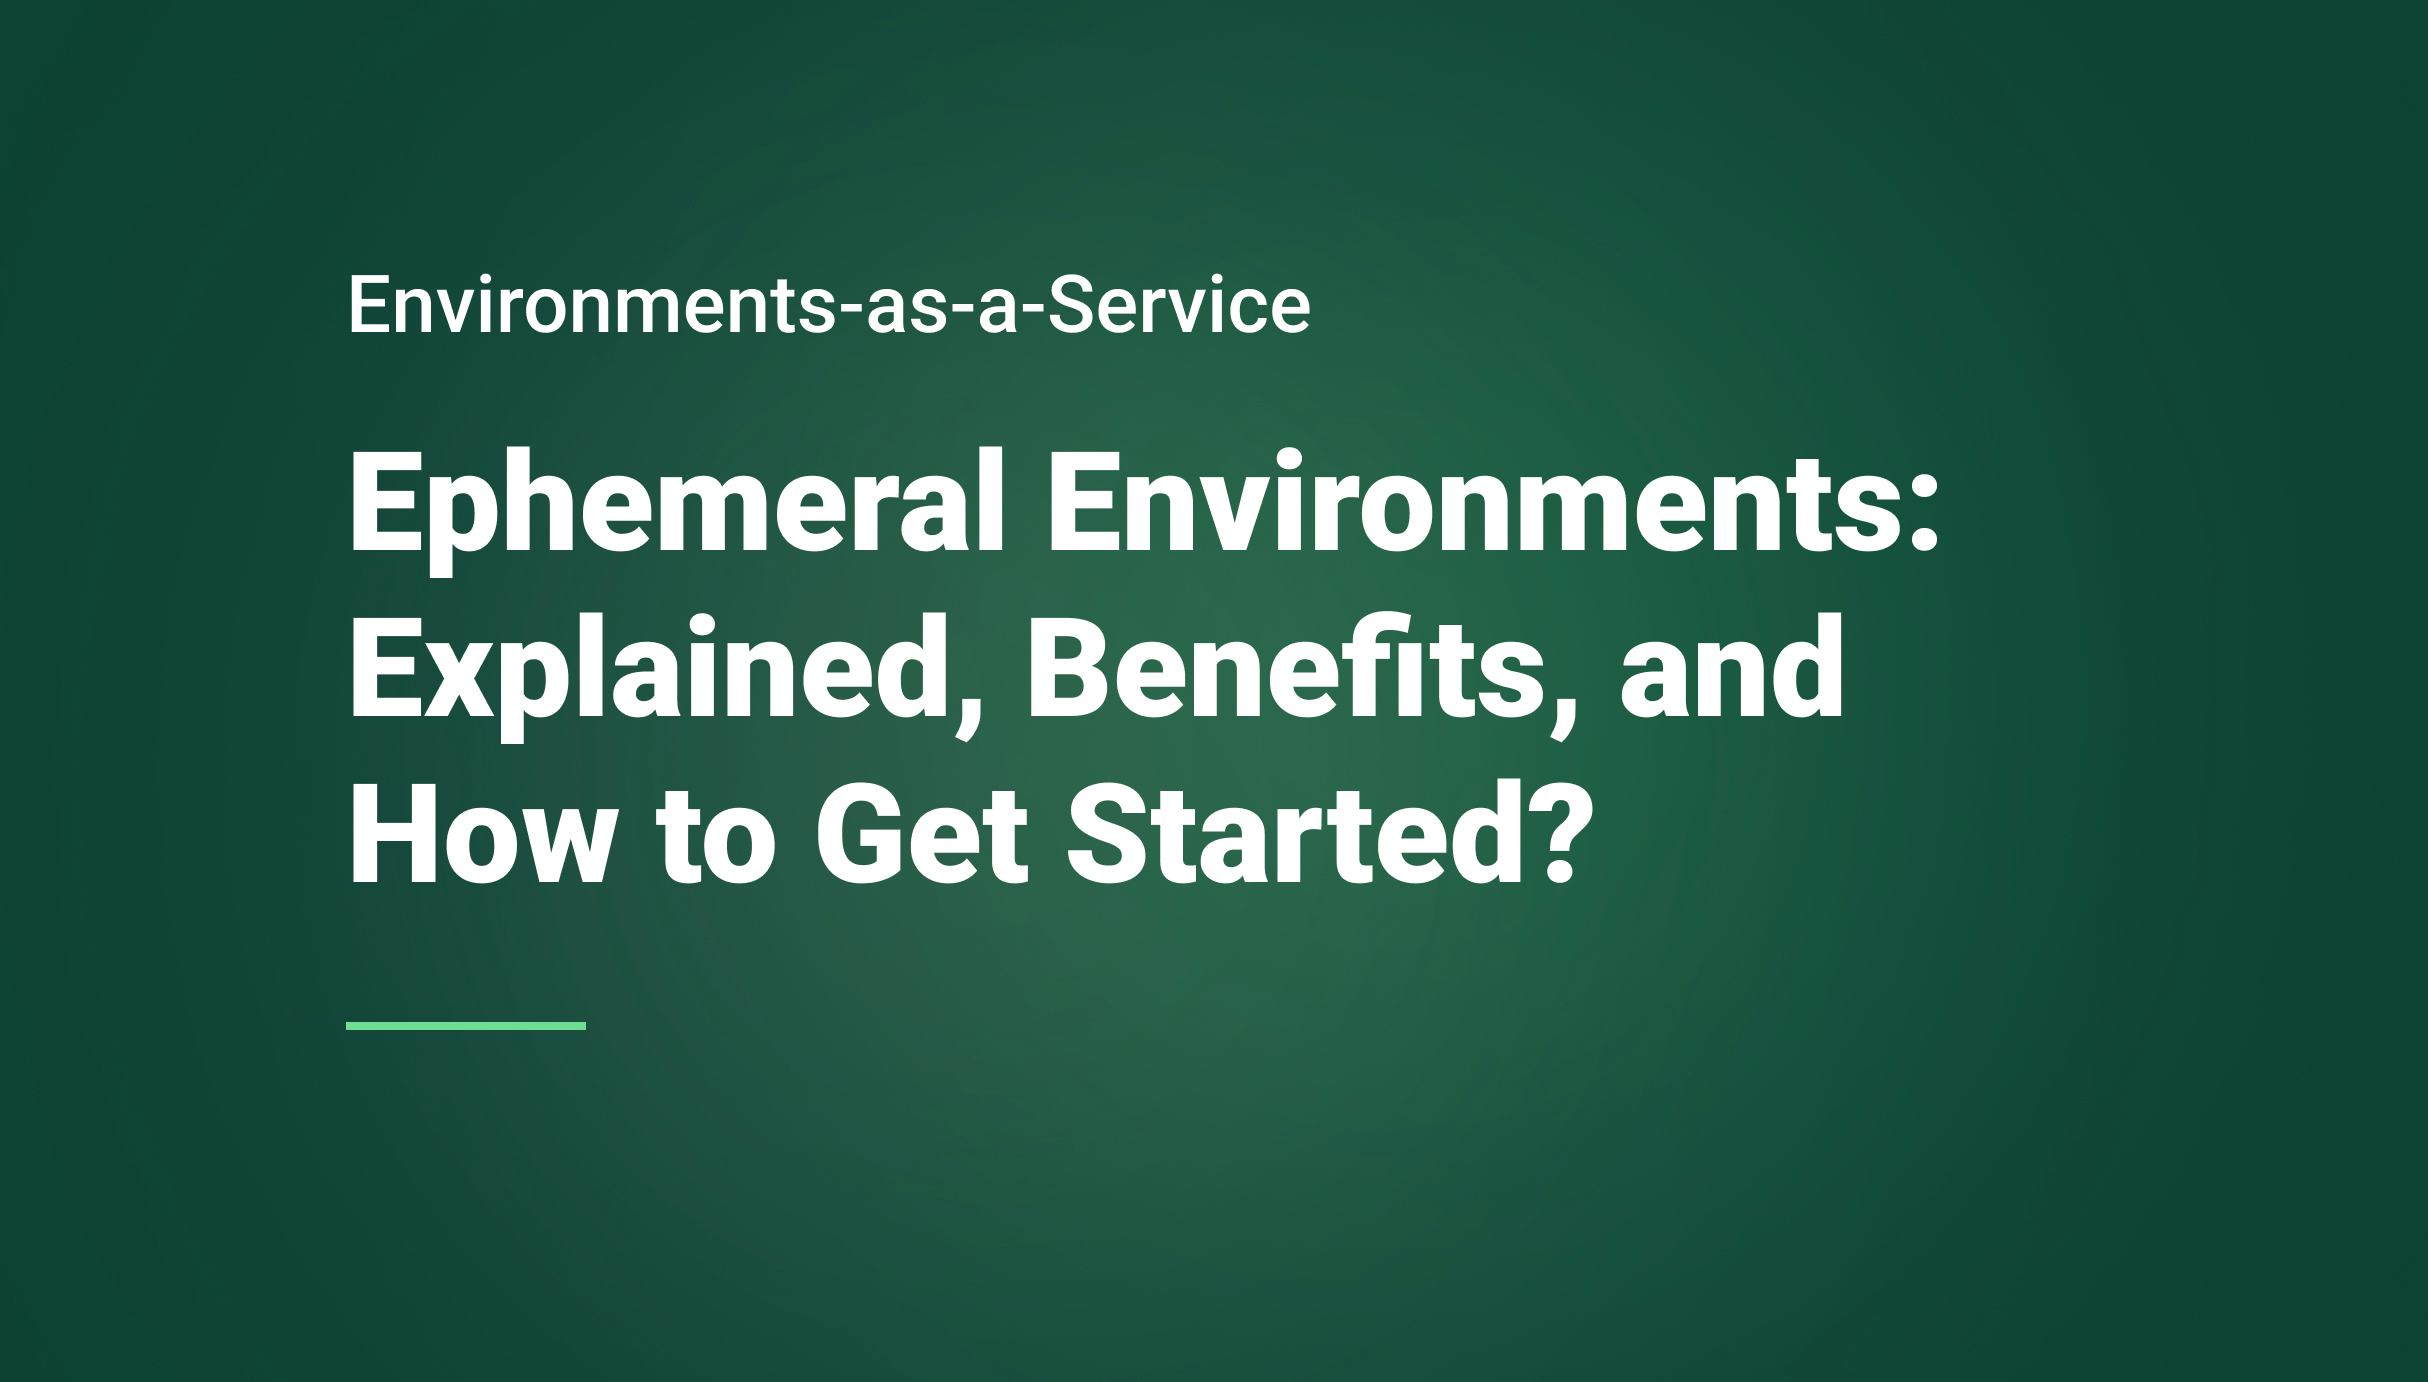 Ephemeral Environments: Explained, Benefits, and How to Get Started?